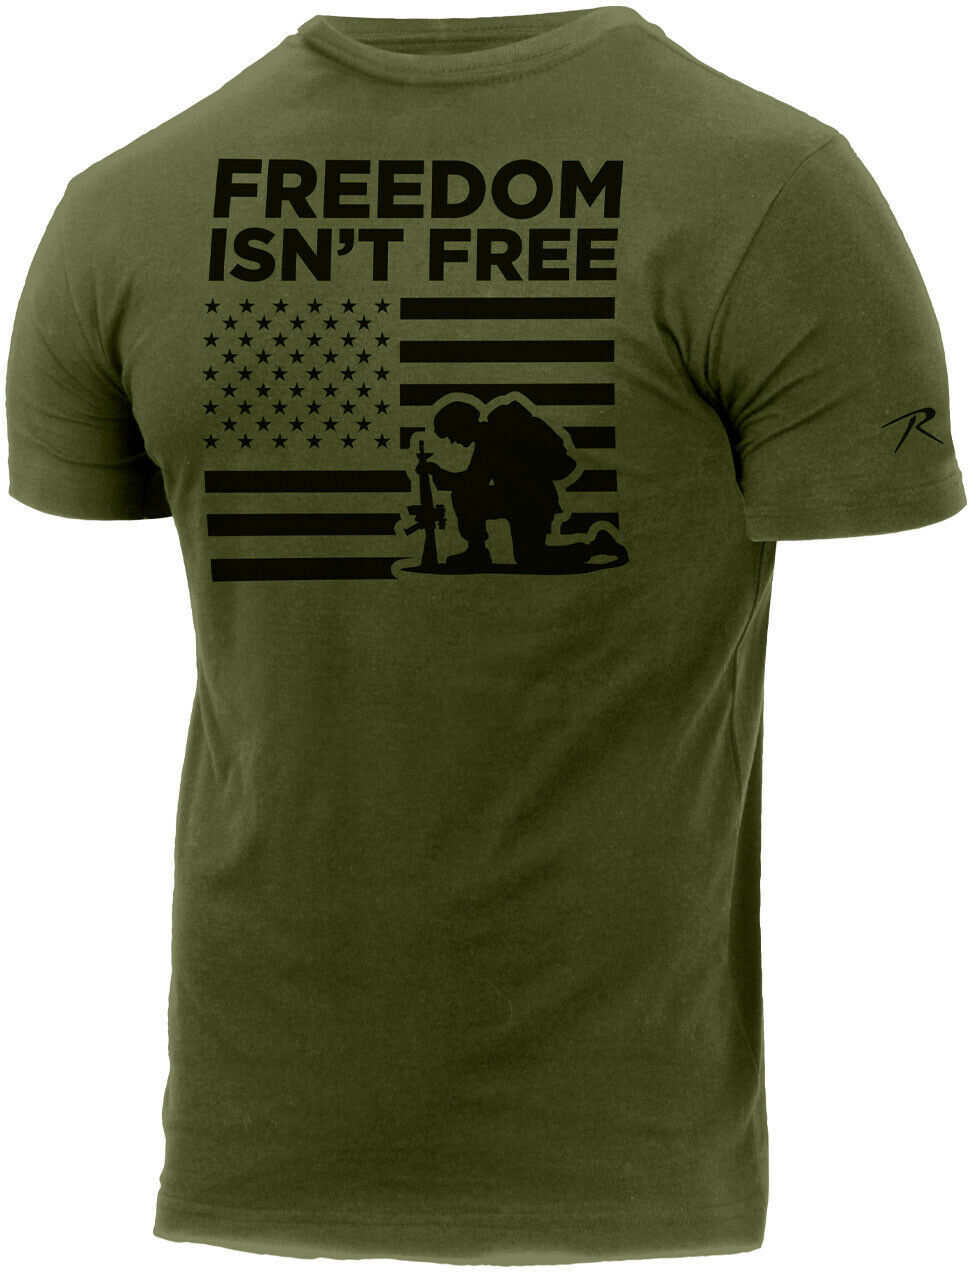 Olive Drab Freedom Isn't Free US Flag Soldier Military Army T-Shirt Tee ...